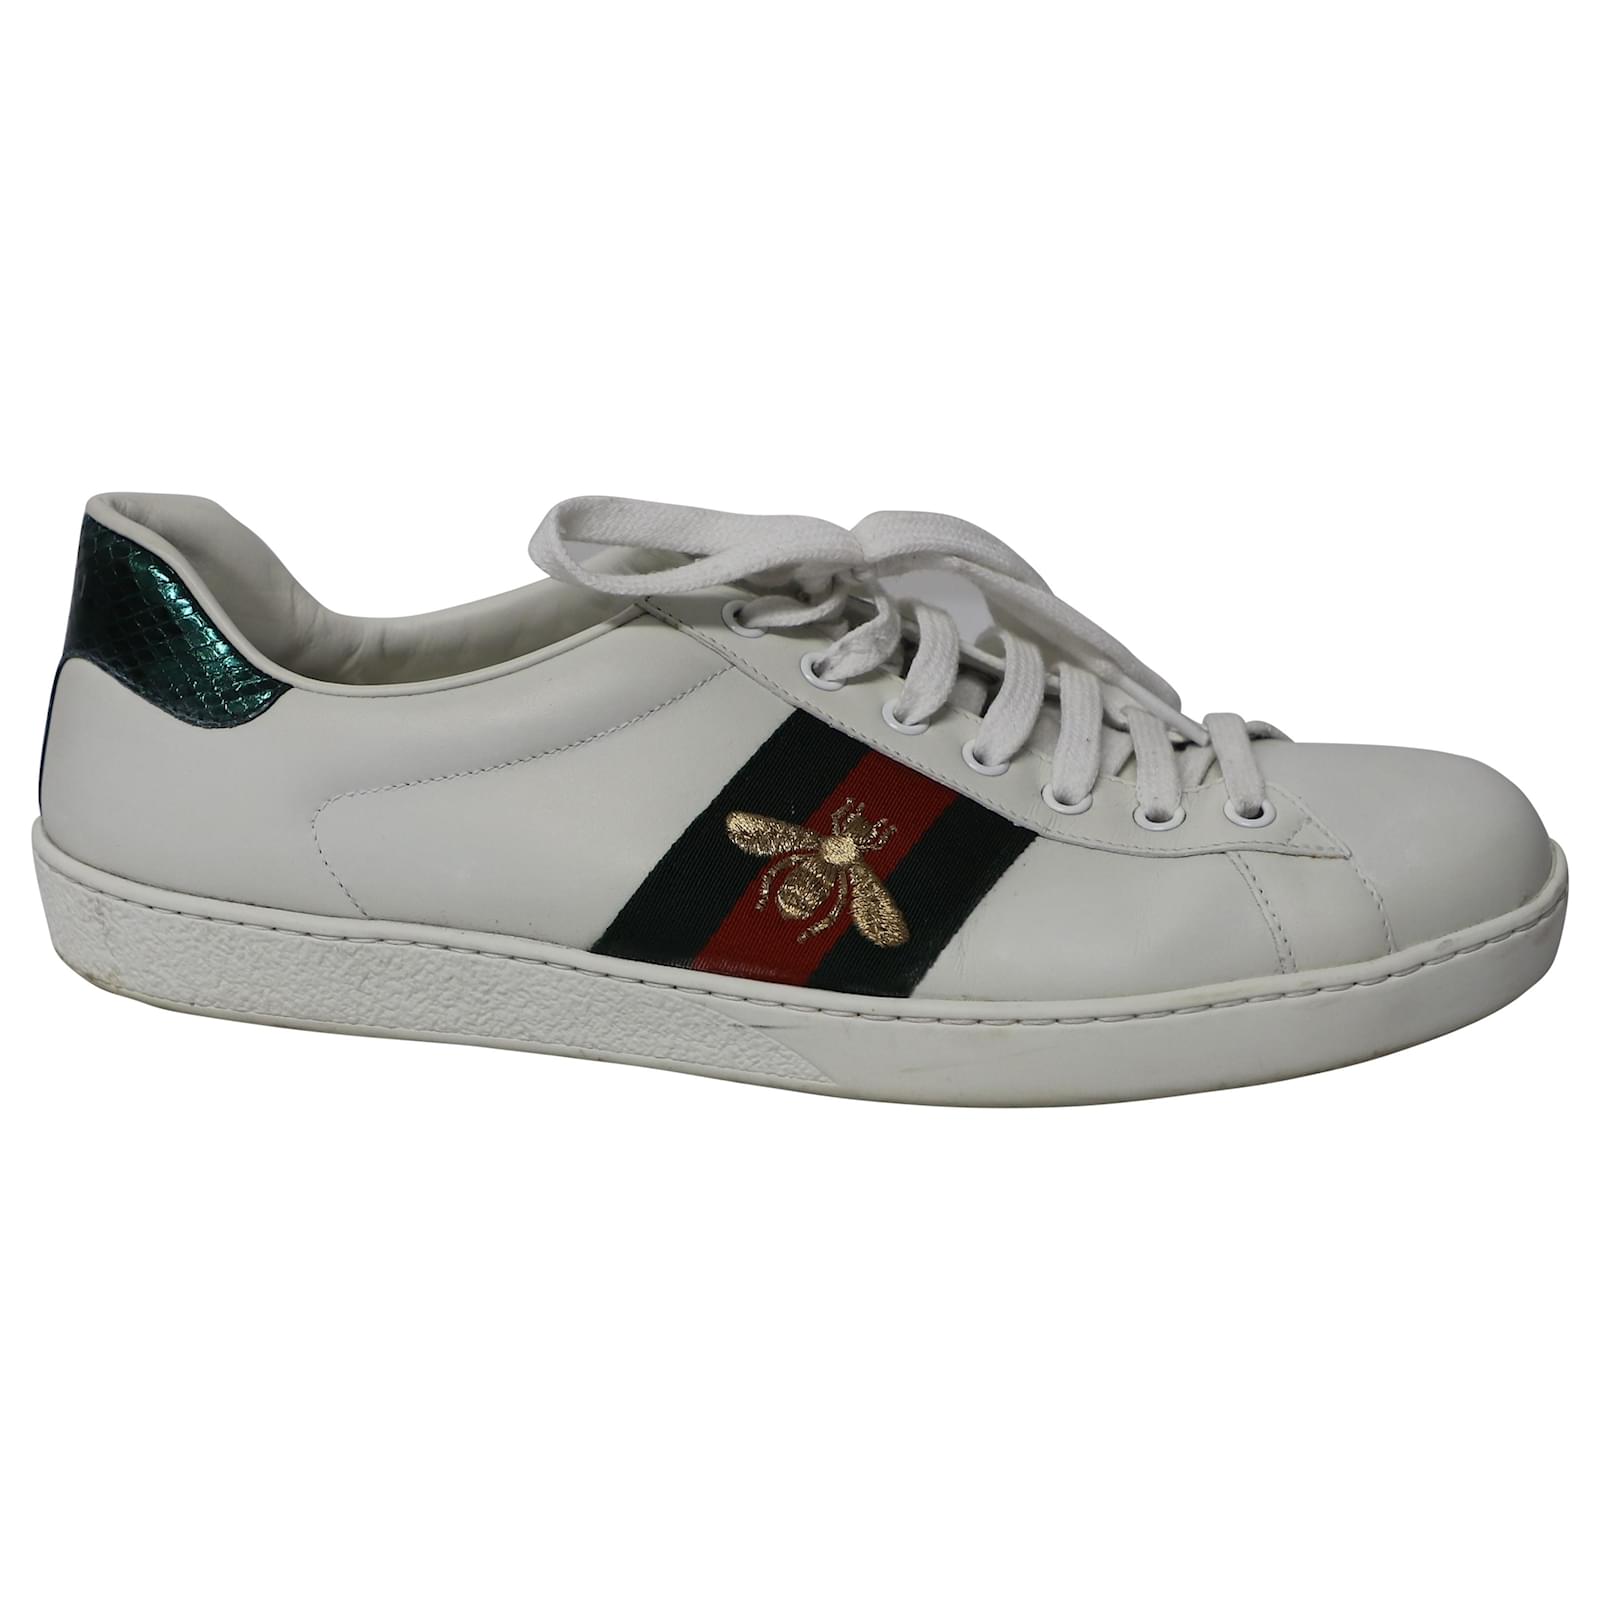 Gucci Shoes Women's Ace Golden Bees Supreme Leather Sneakers White Size 8  us | eBay